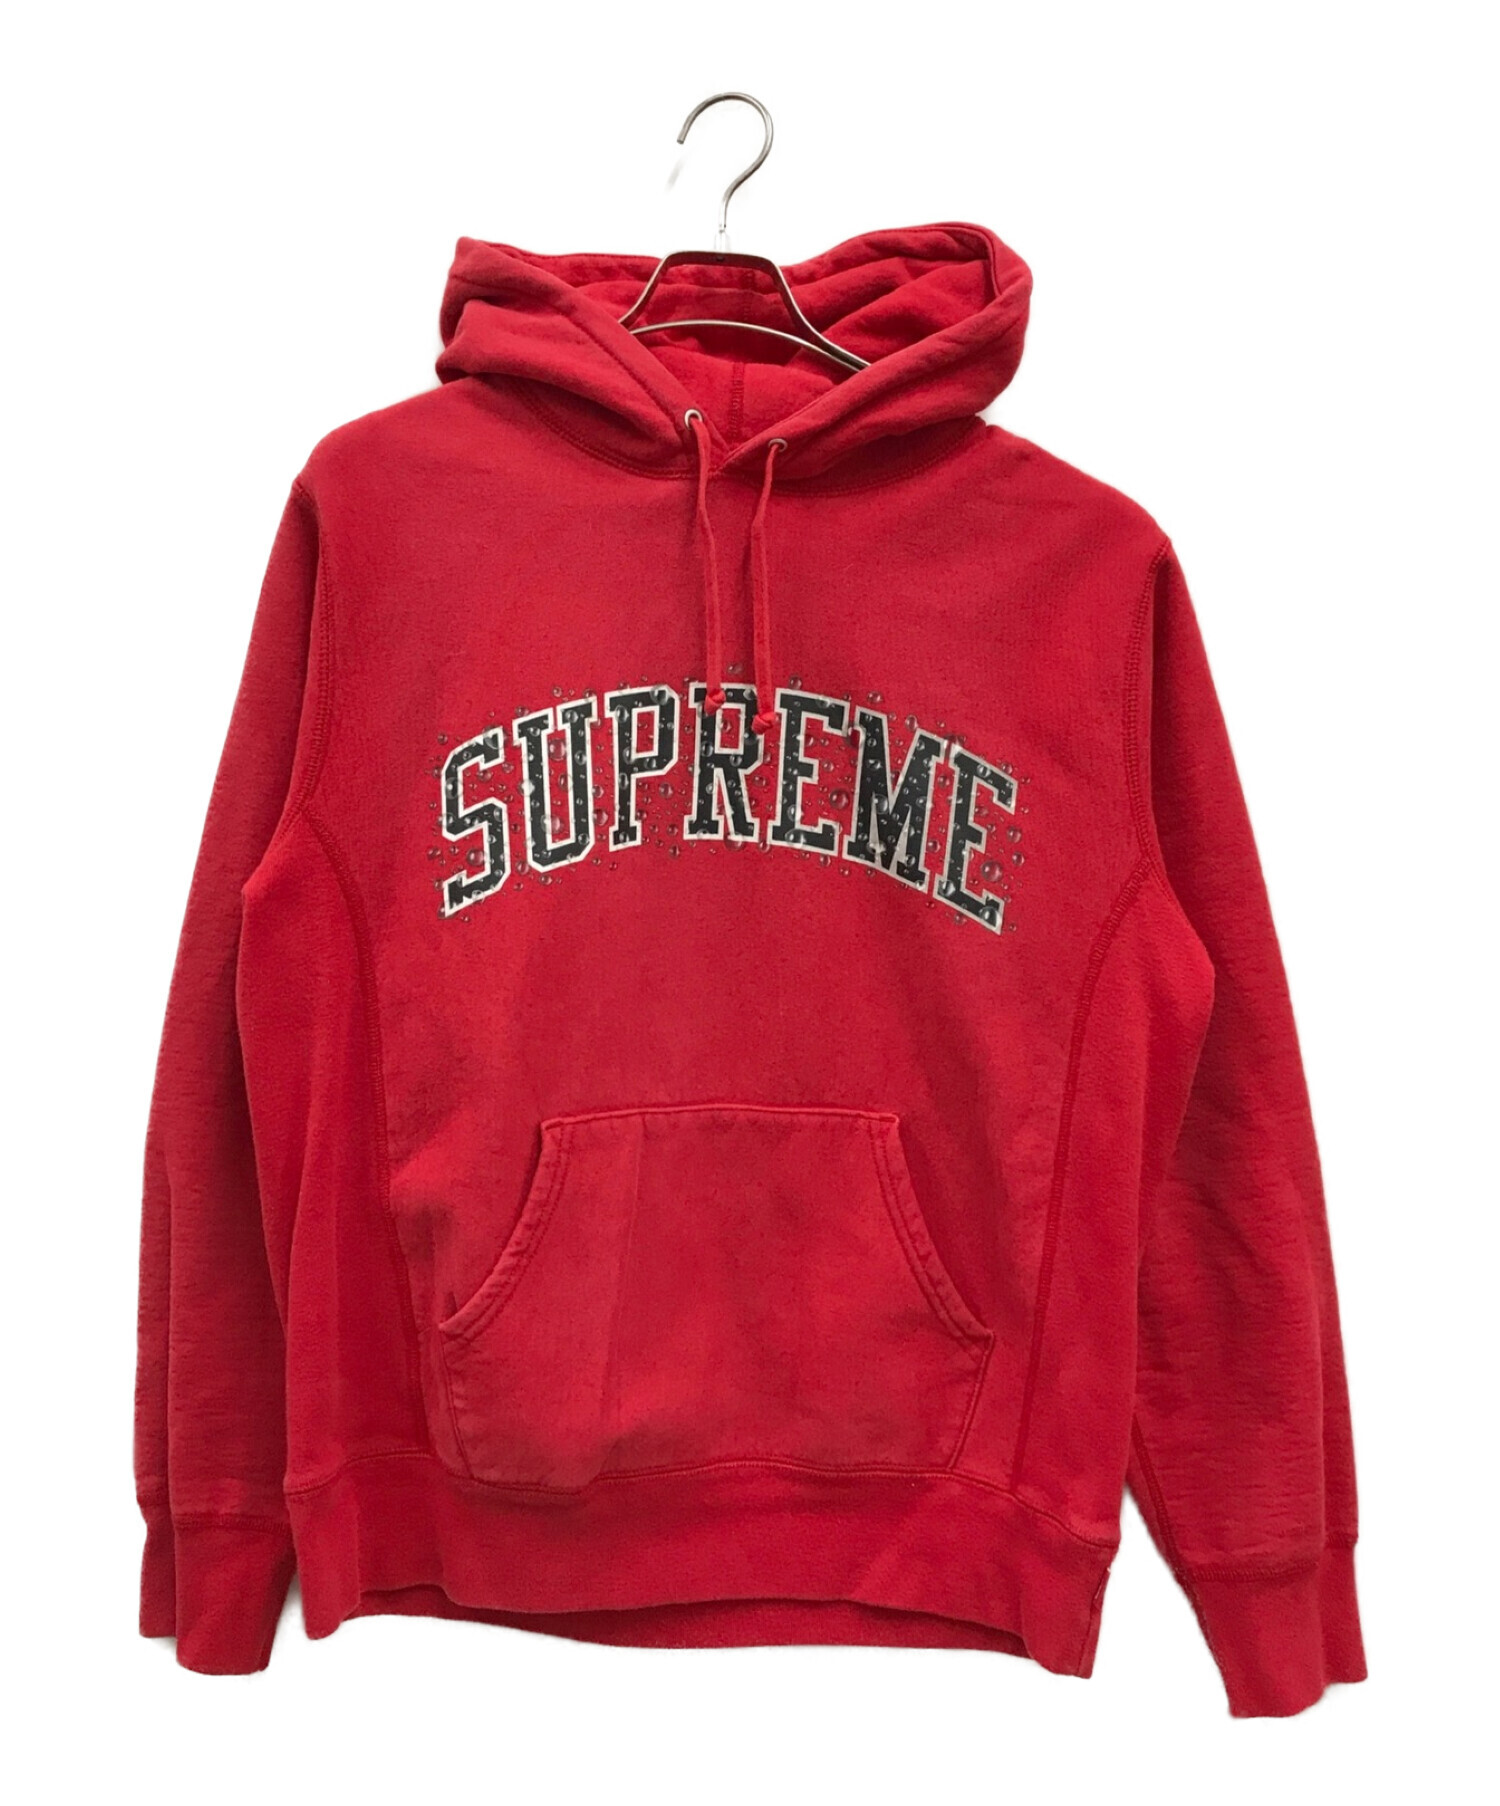 supreme water arc hooded